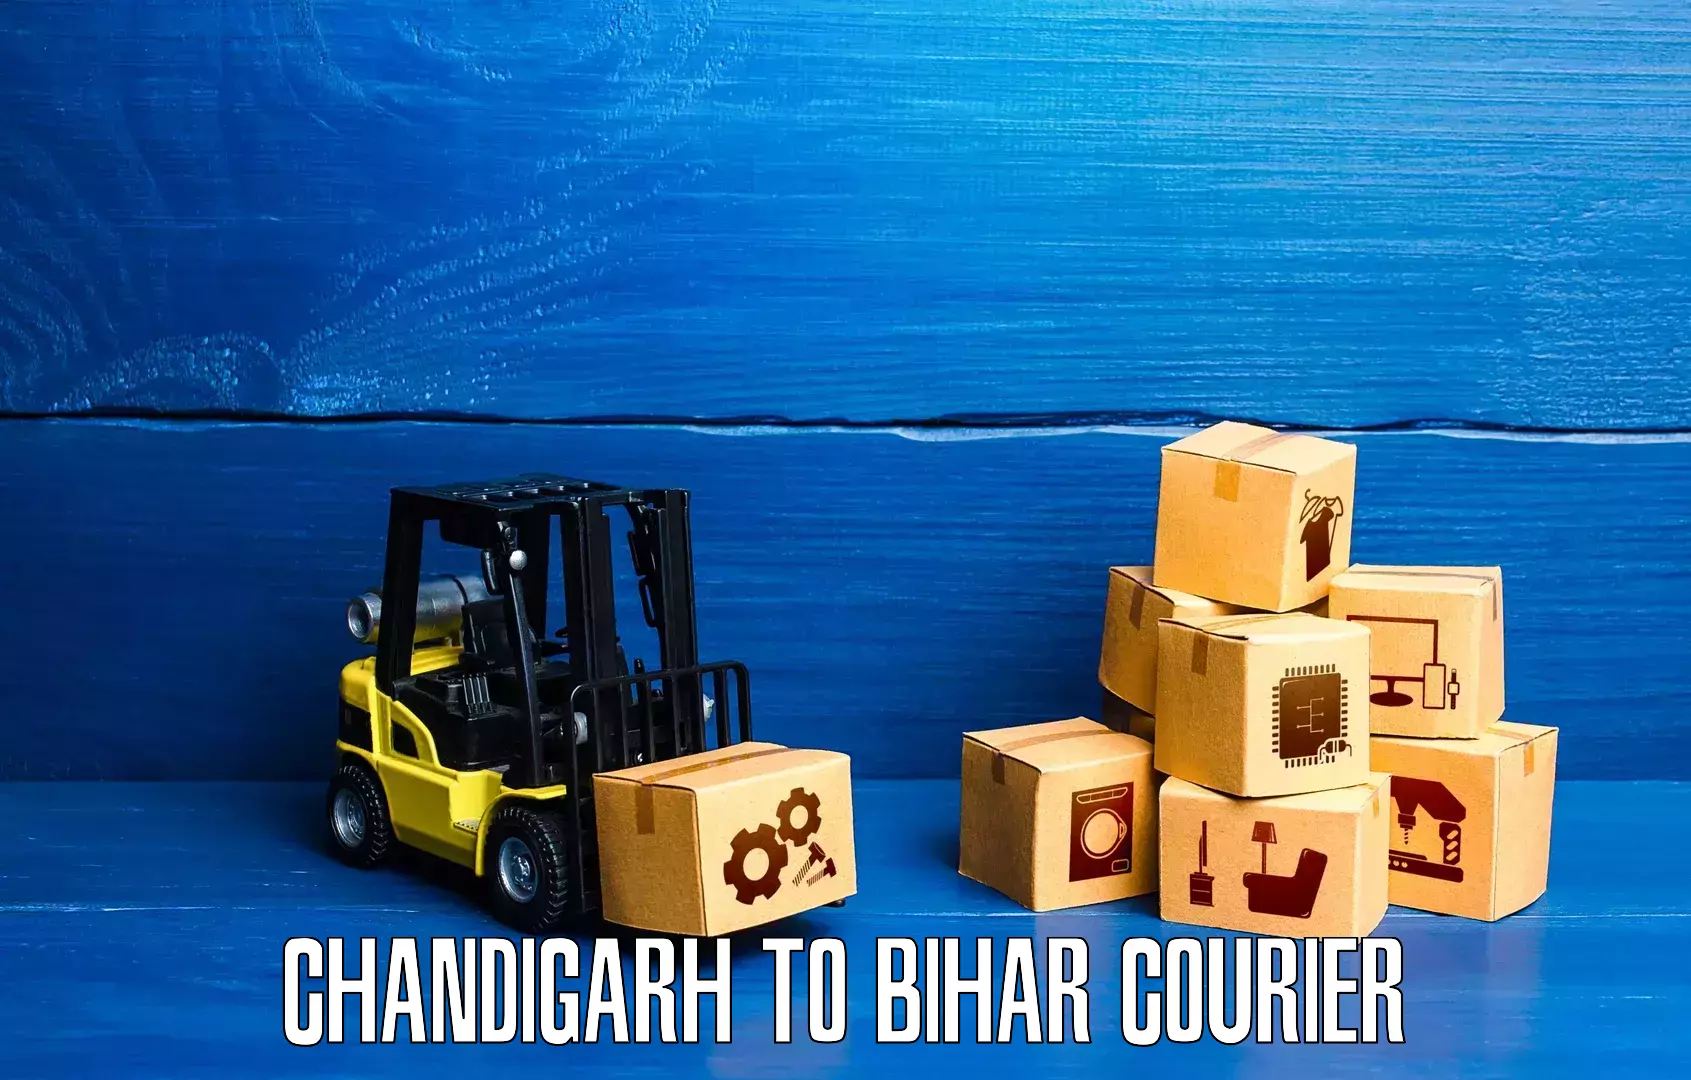 24-hour courier service Chandigarh to Chainpur